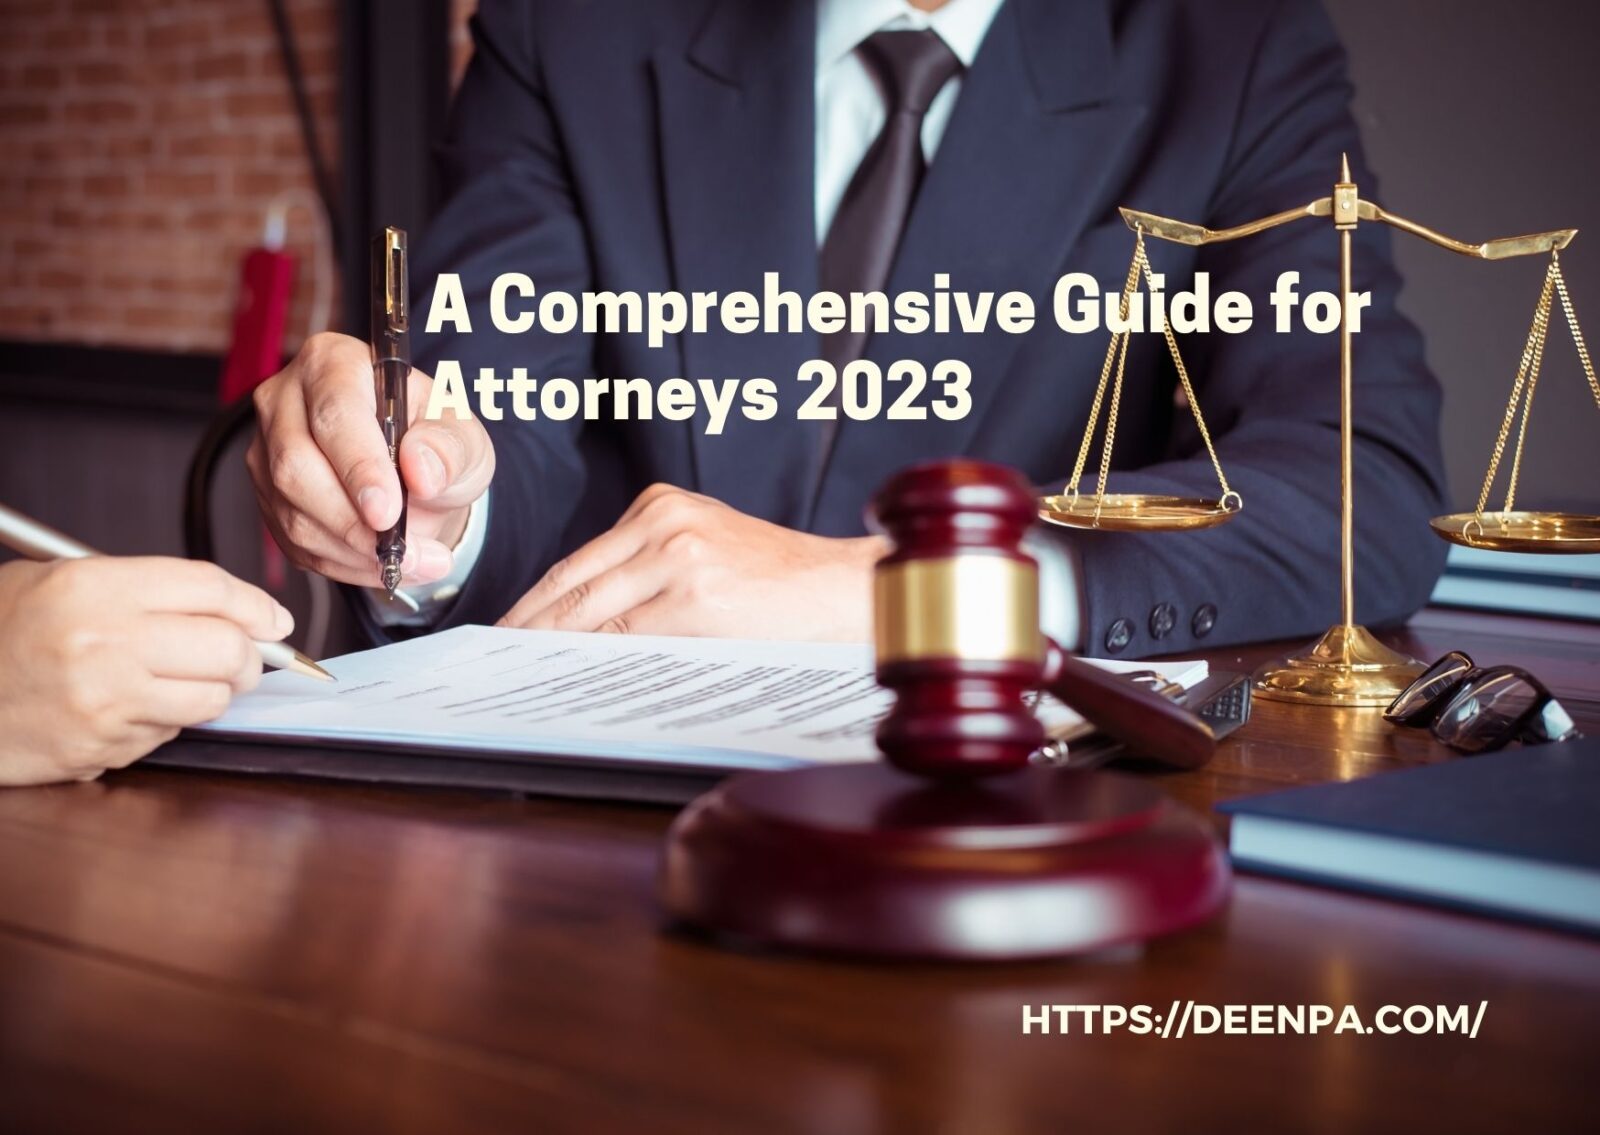 A Comprehensive Guide for Attorneys 2023